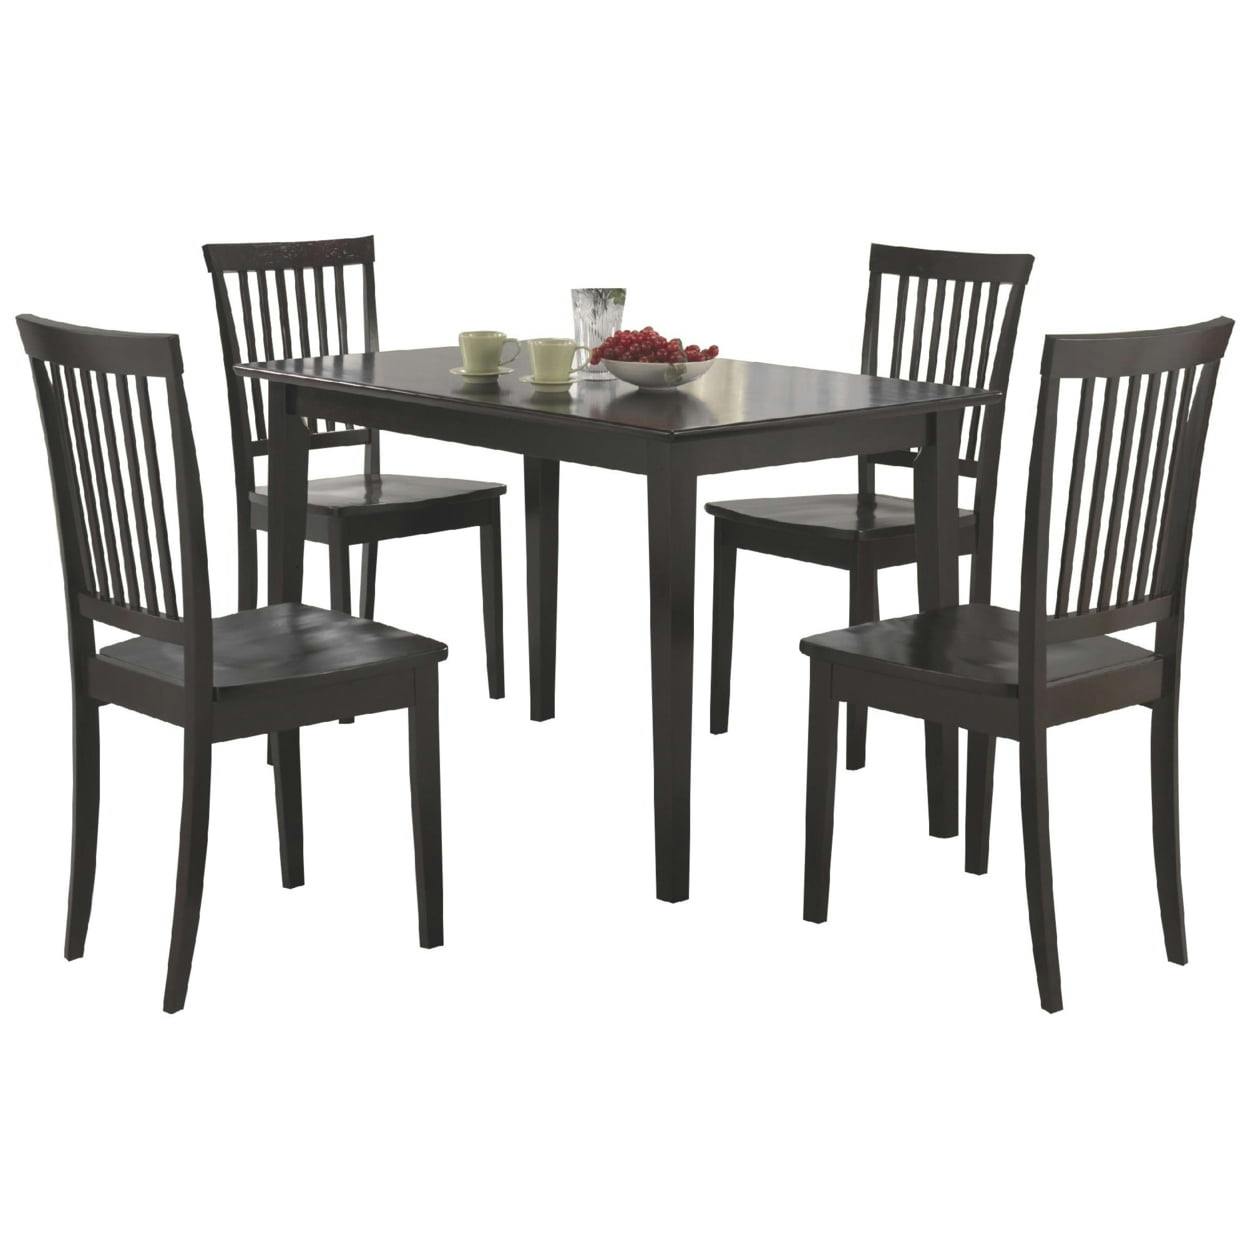 Classic Cappuccino 5-Piece Rectangular Dining Set with Slat Back Chairs